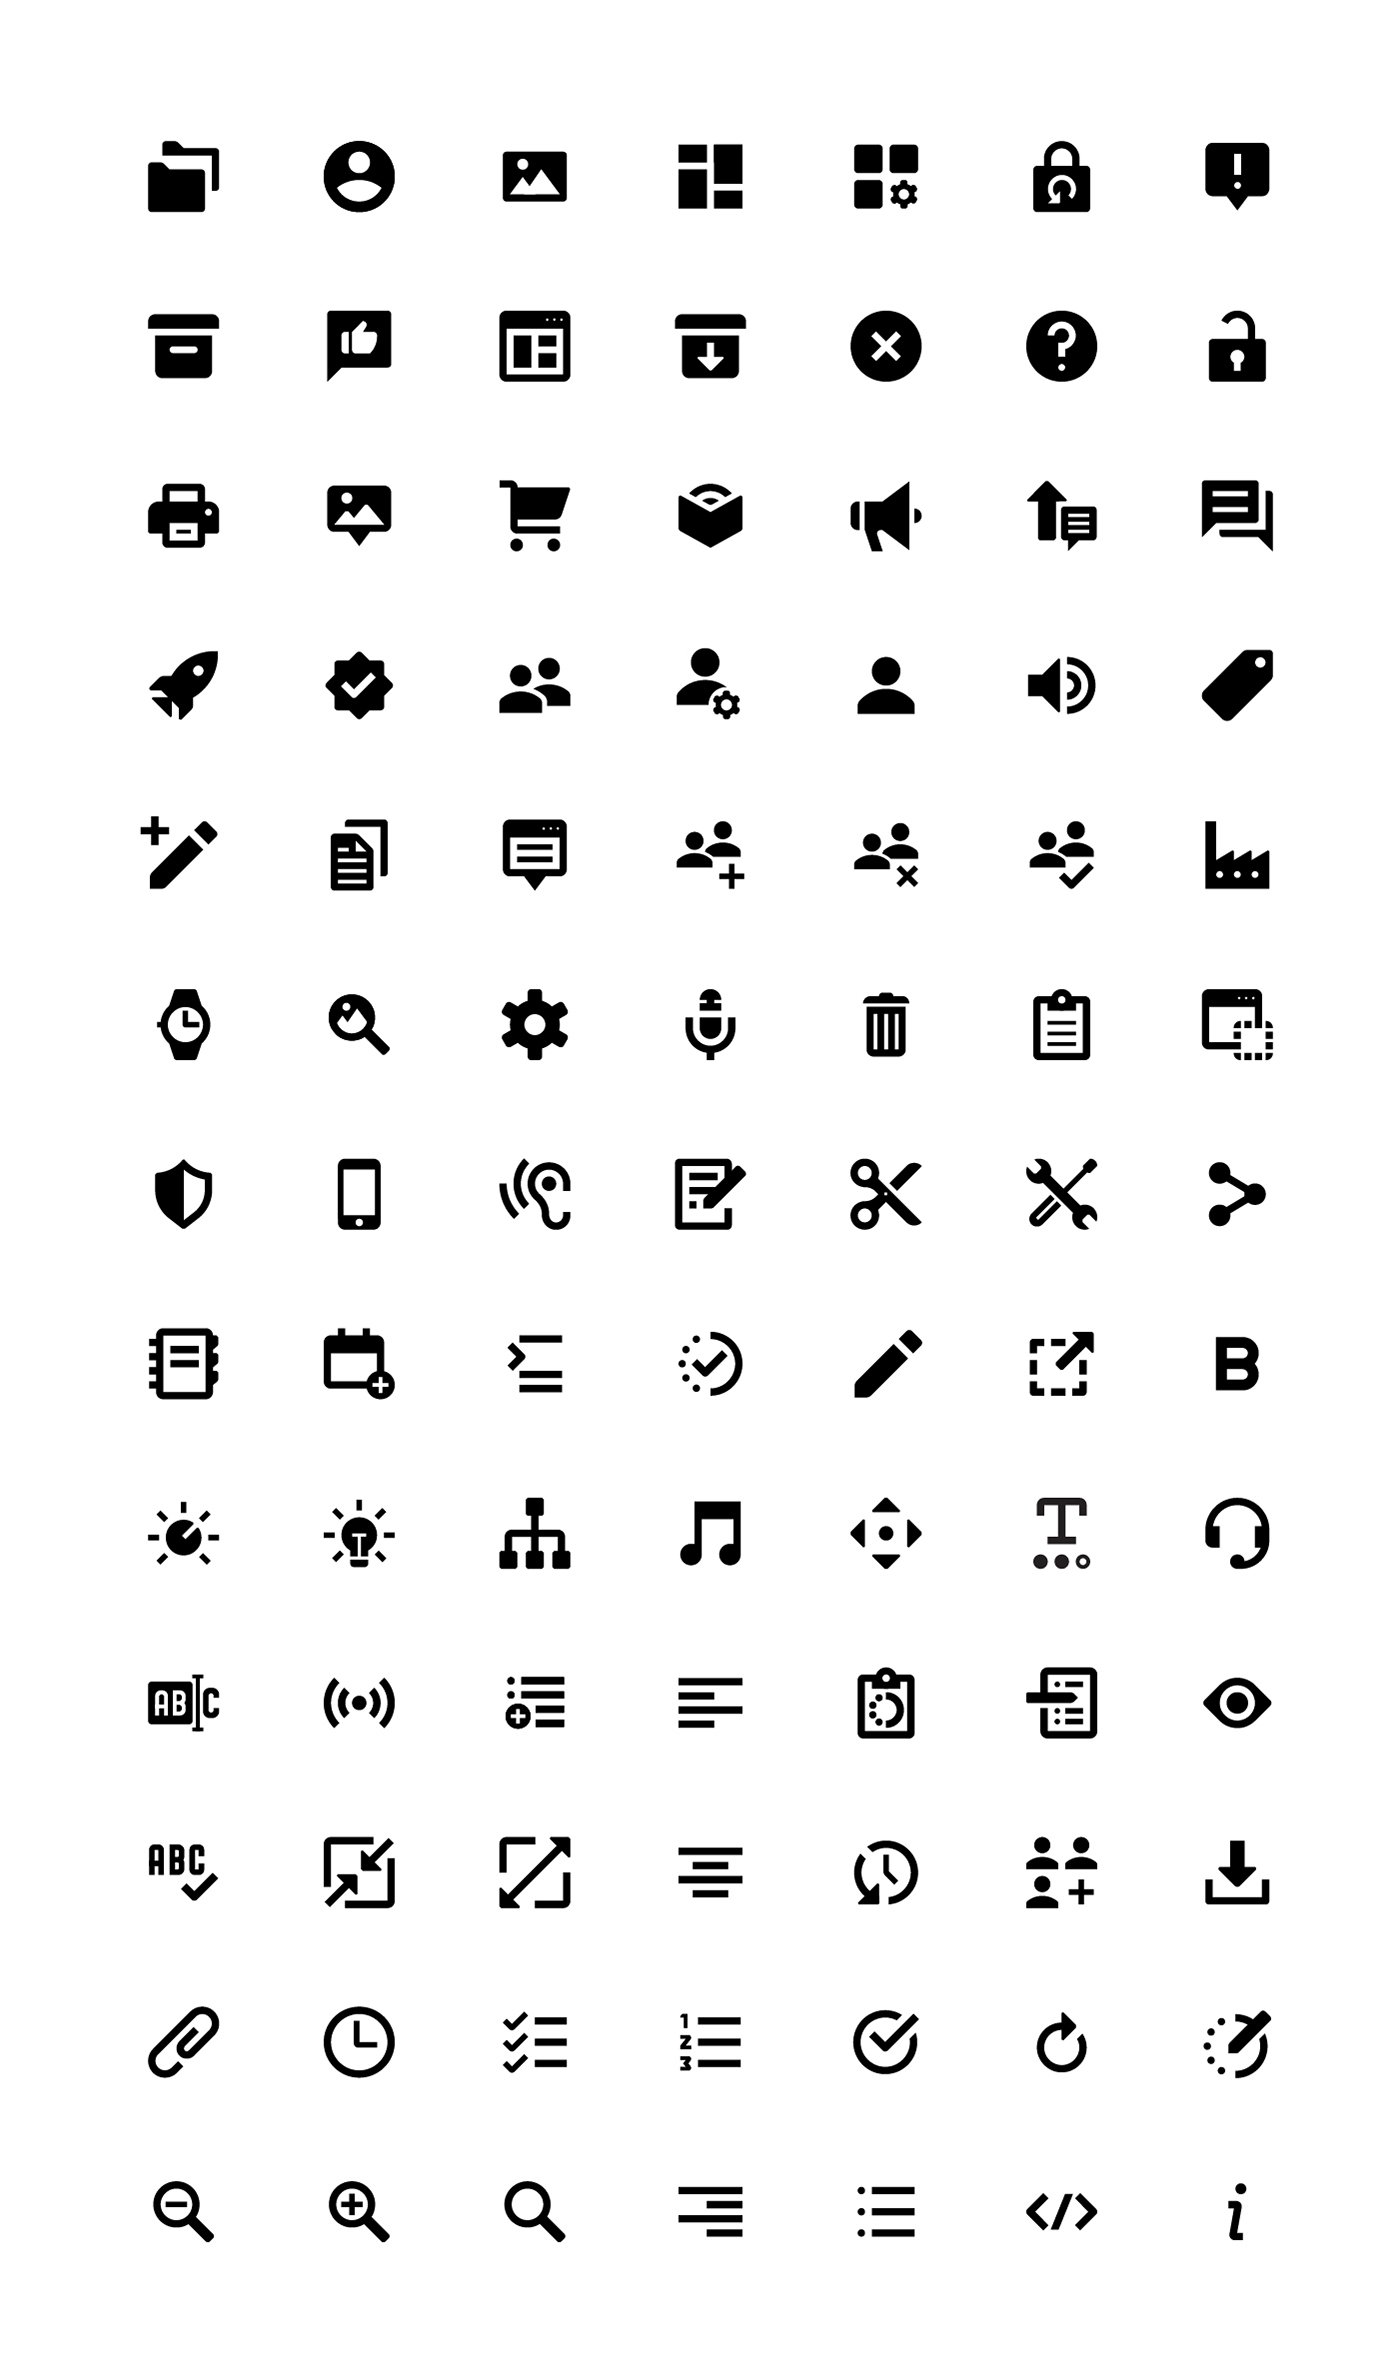 iconography icons graphic design  UI Website navigation pictograms